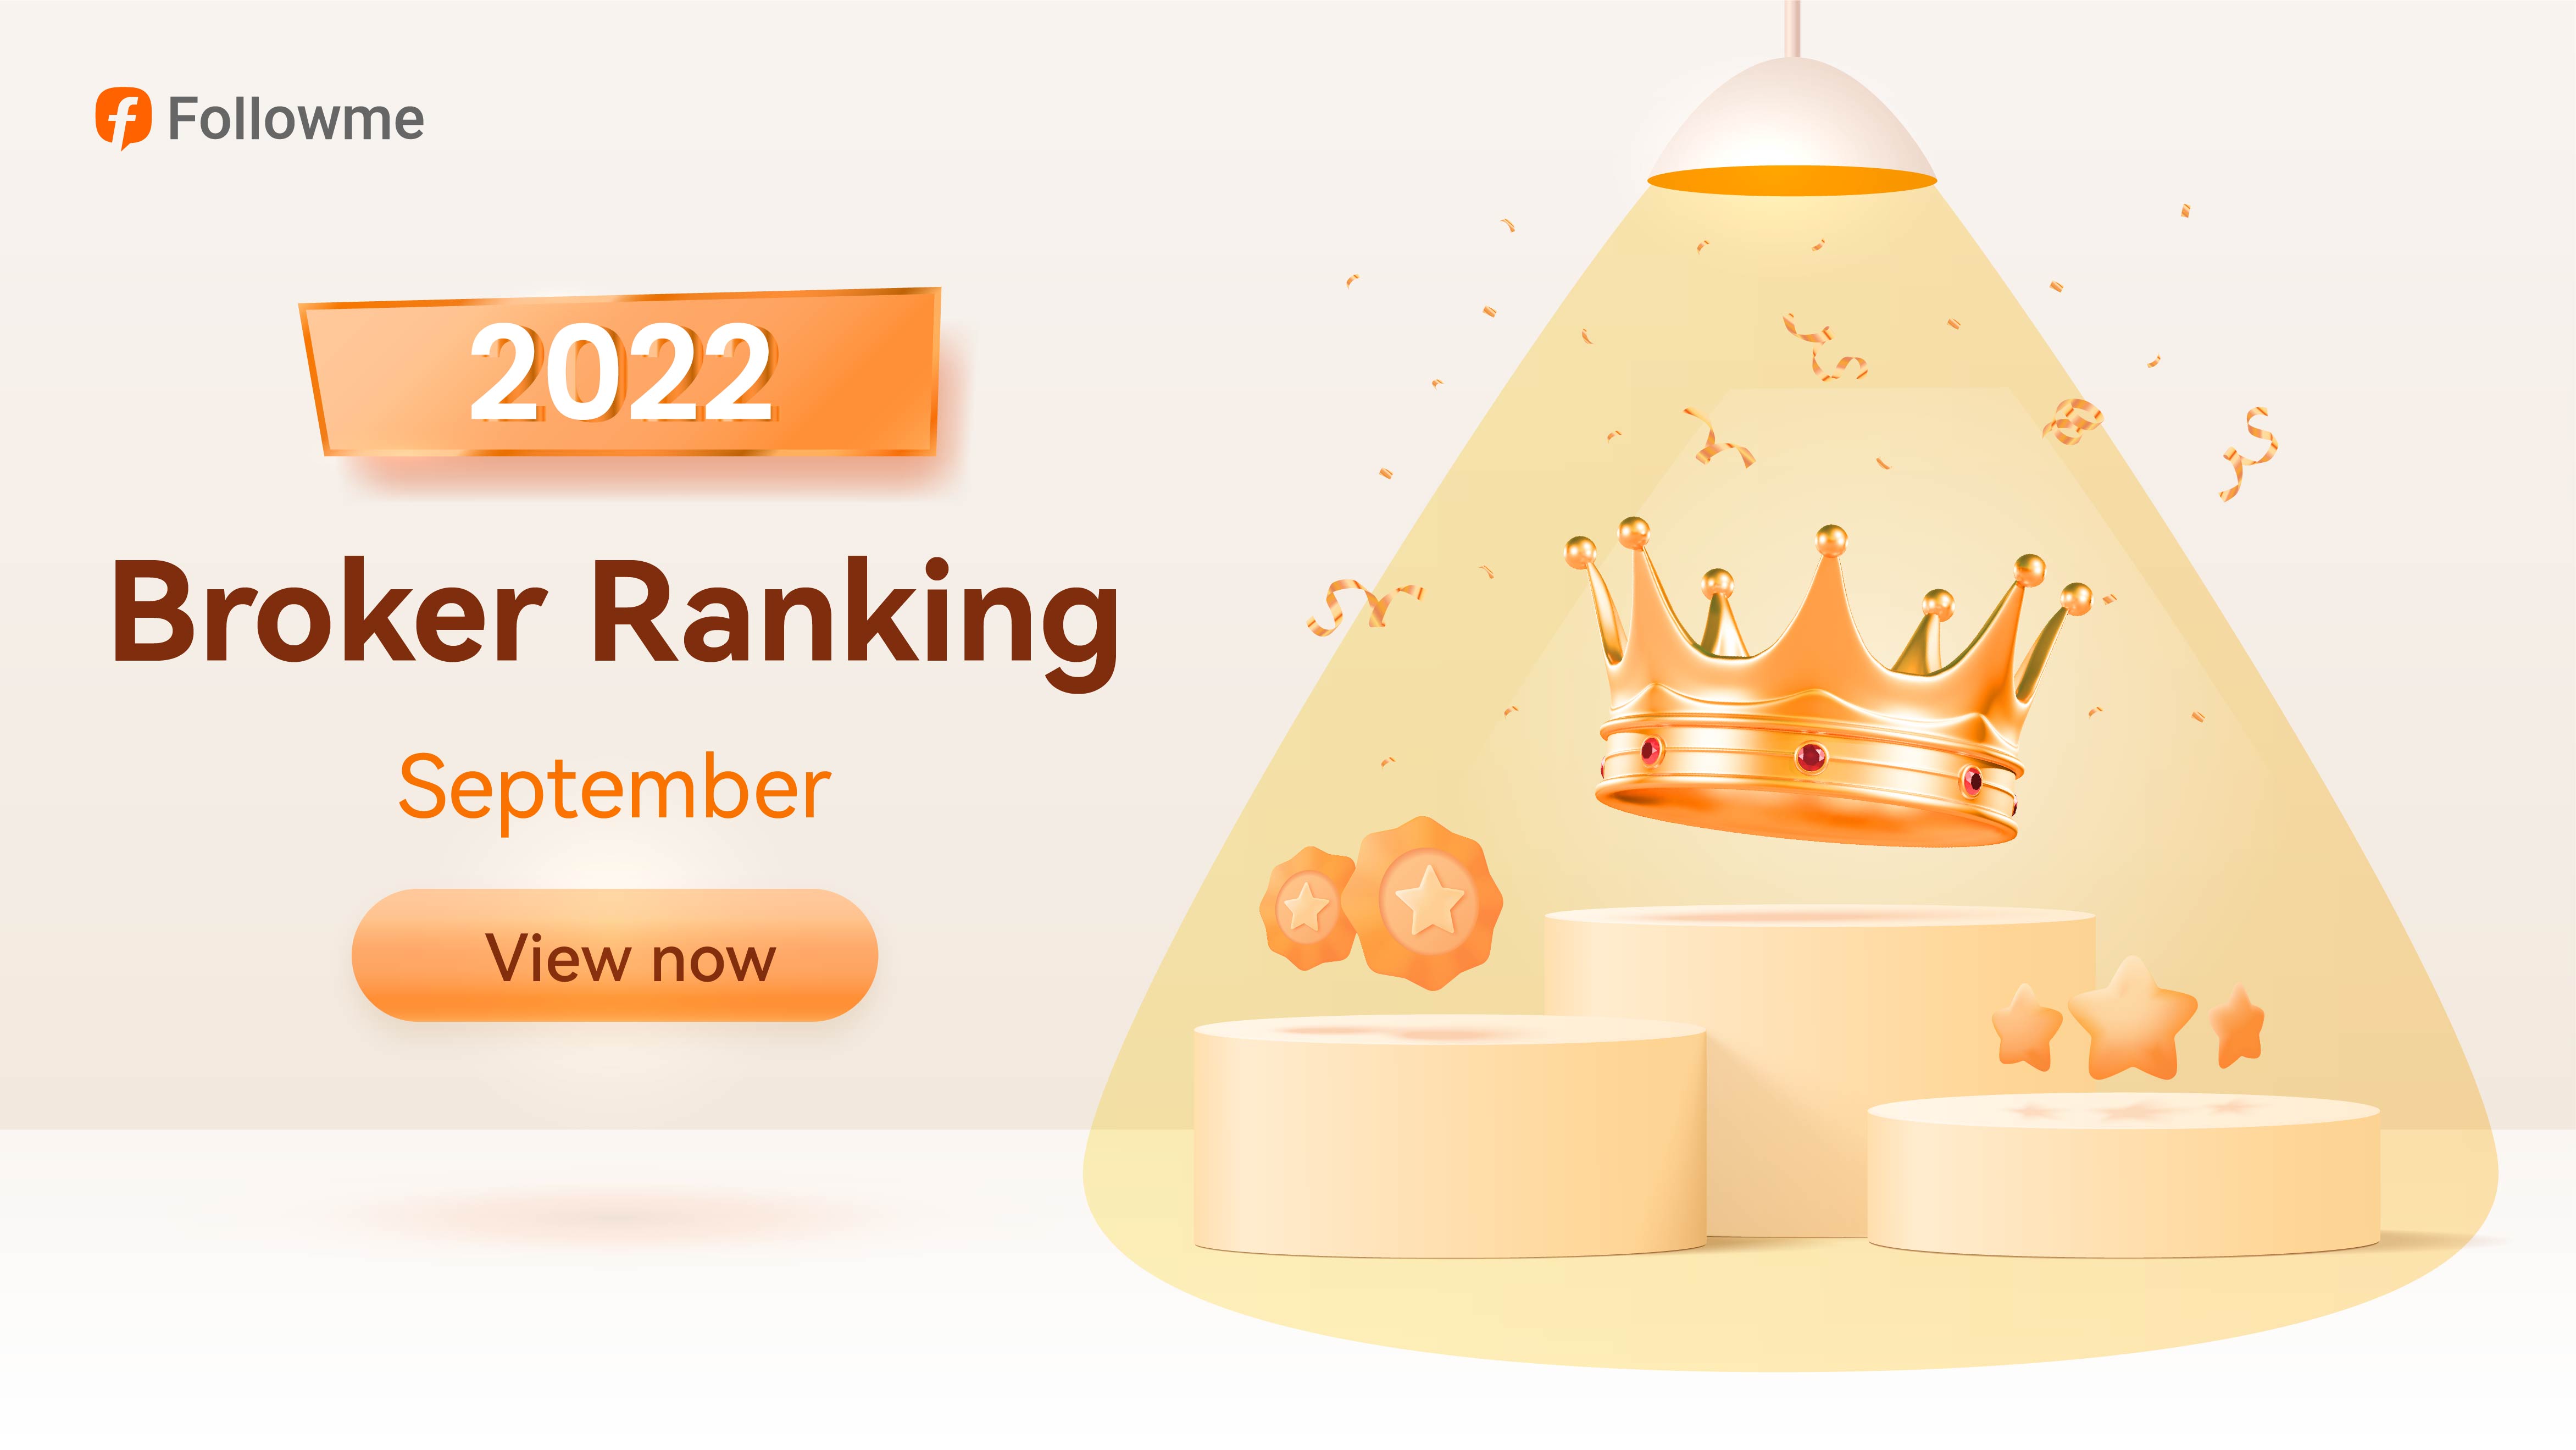 Broker Ranking-Sep: Who are the Top 3 in the Community?